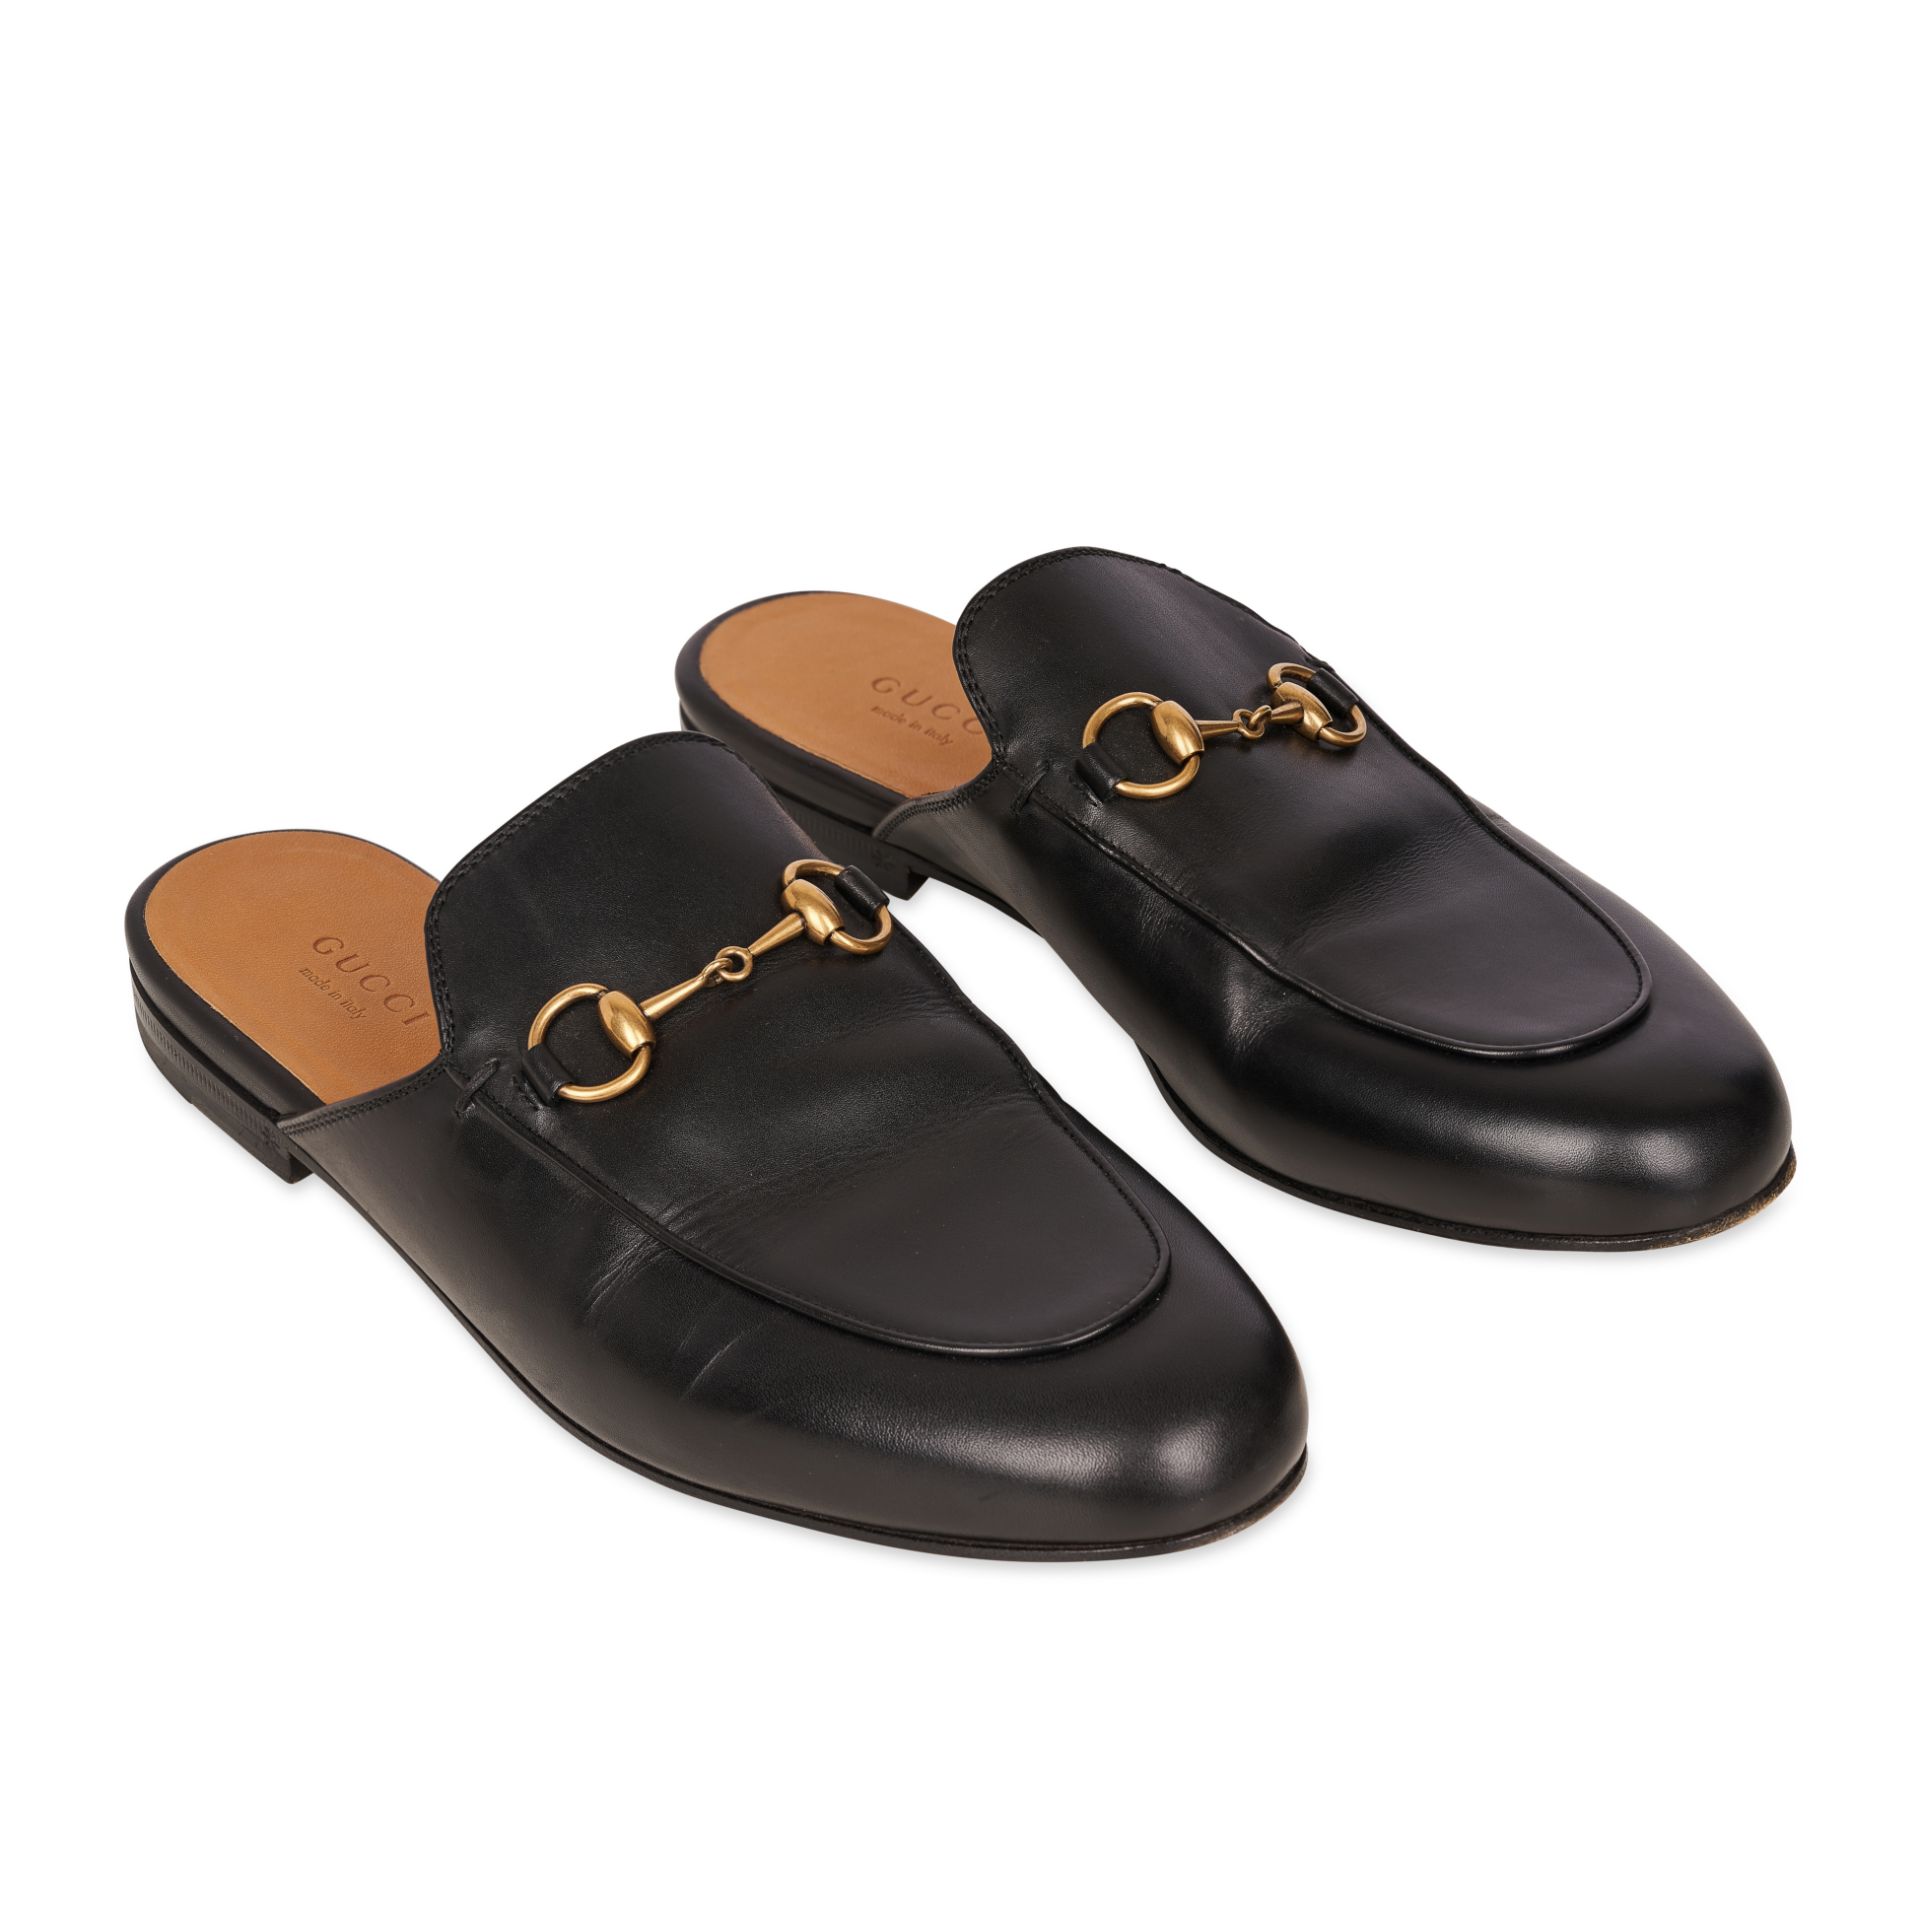 GUCCI PRINCETOWN LOAFER SLIDES Condition grade B+. Size 37. Black smooth leather with open back...